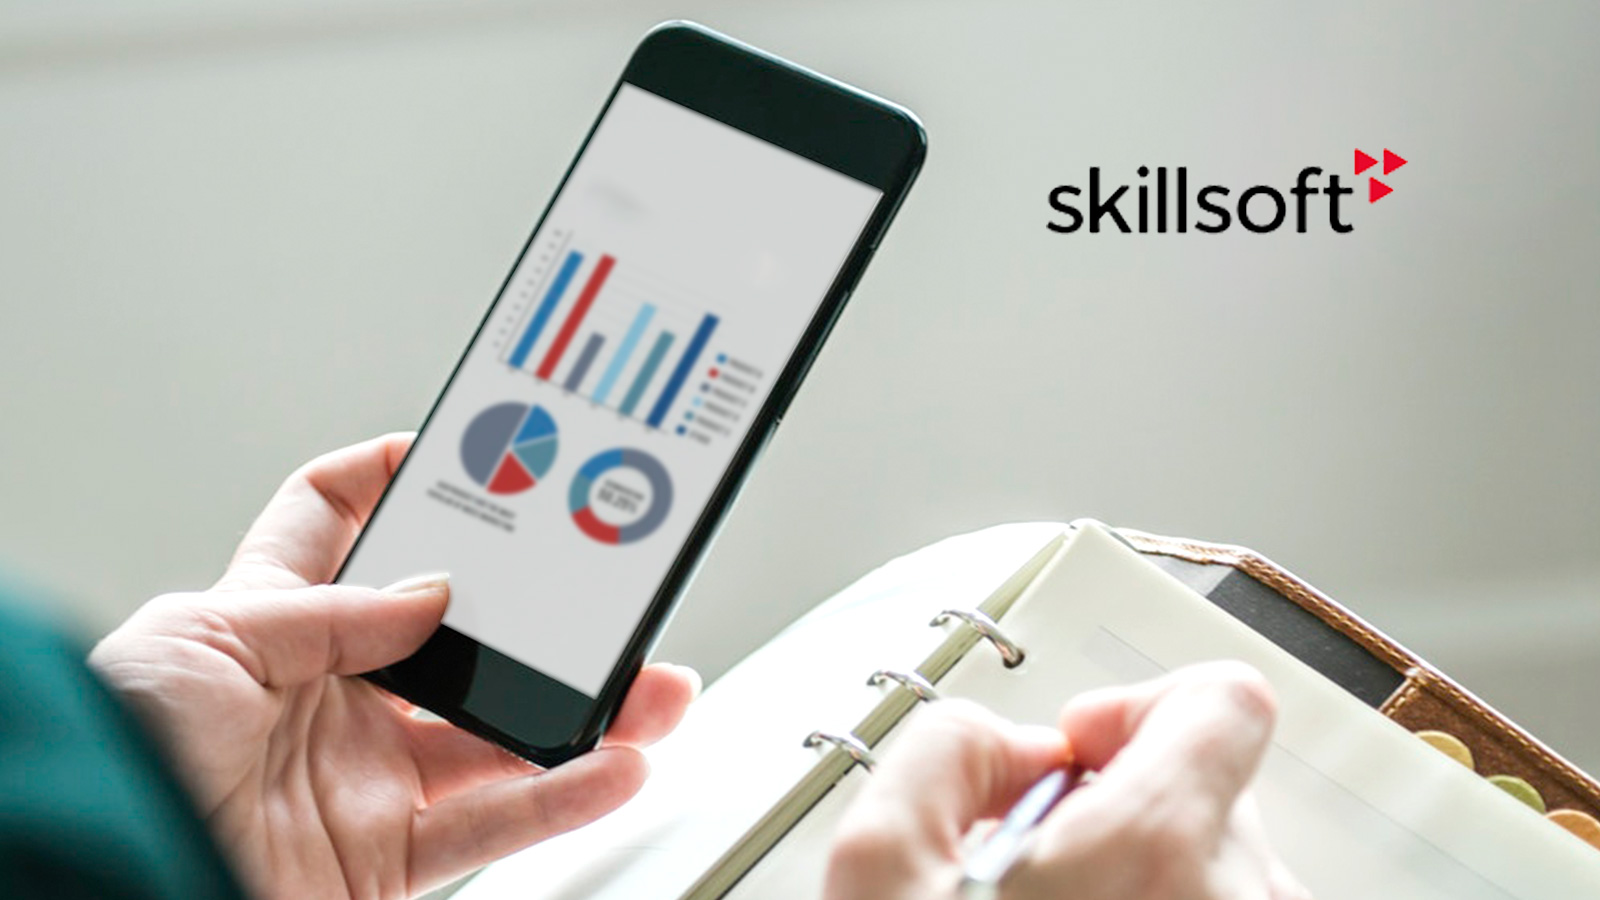 Skillsoft Launches New Digital Learning Journeys for Key Technology Roles